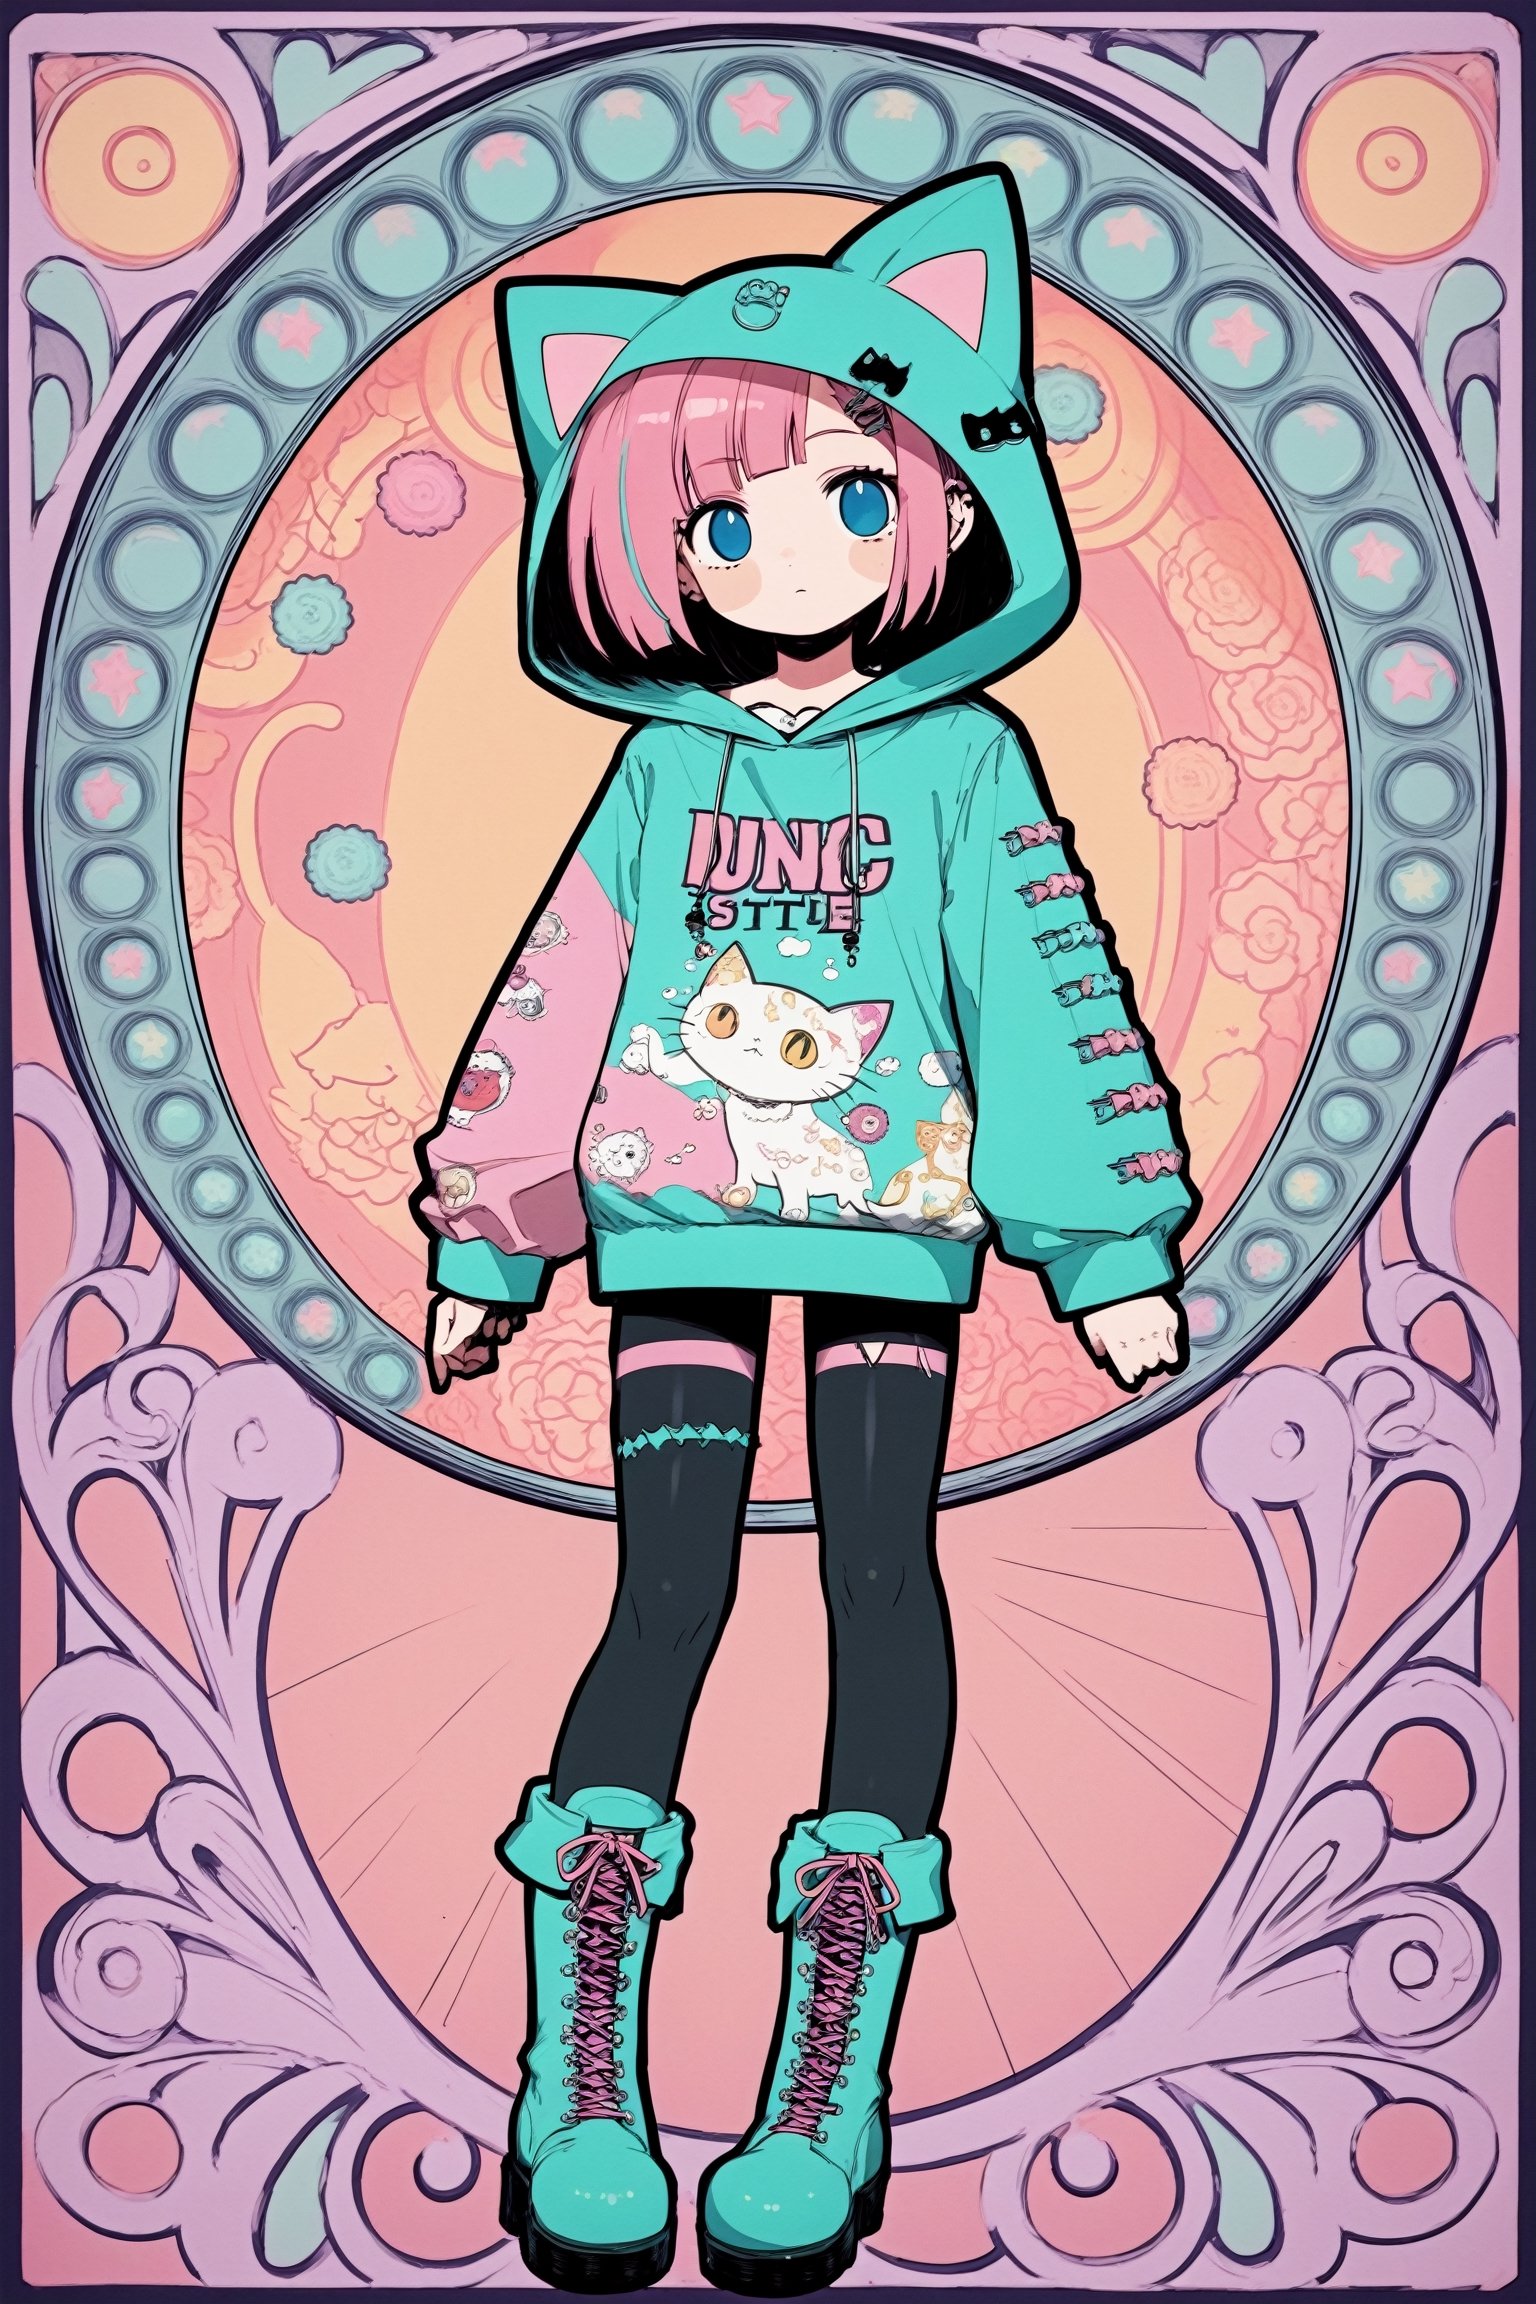 ,vtuber,1girl,
cute anime characters,Beautiful blue eyes,asymmetric bangs,candy punk Fashion,Hooded hoodie shaped like a cute kitten,cat ear hood,Pastel colored clothes based on blue and pink,Pastel Emo Fashion, Anime Print Shirt,Gothic Style tights, long military boots,,dal-6 style, art nouveau,EMO-Art Nouveau punk